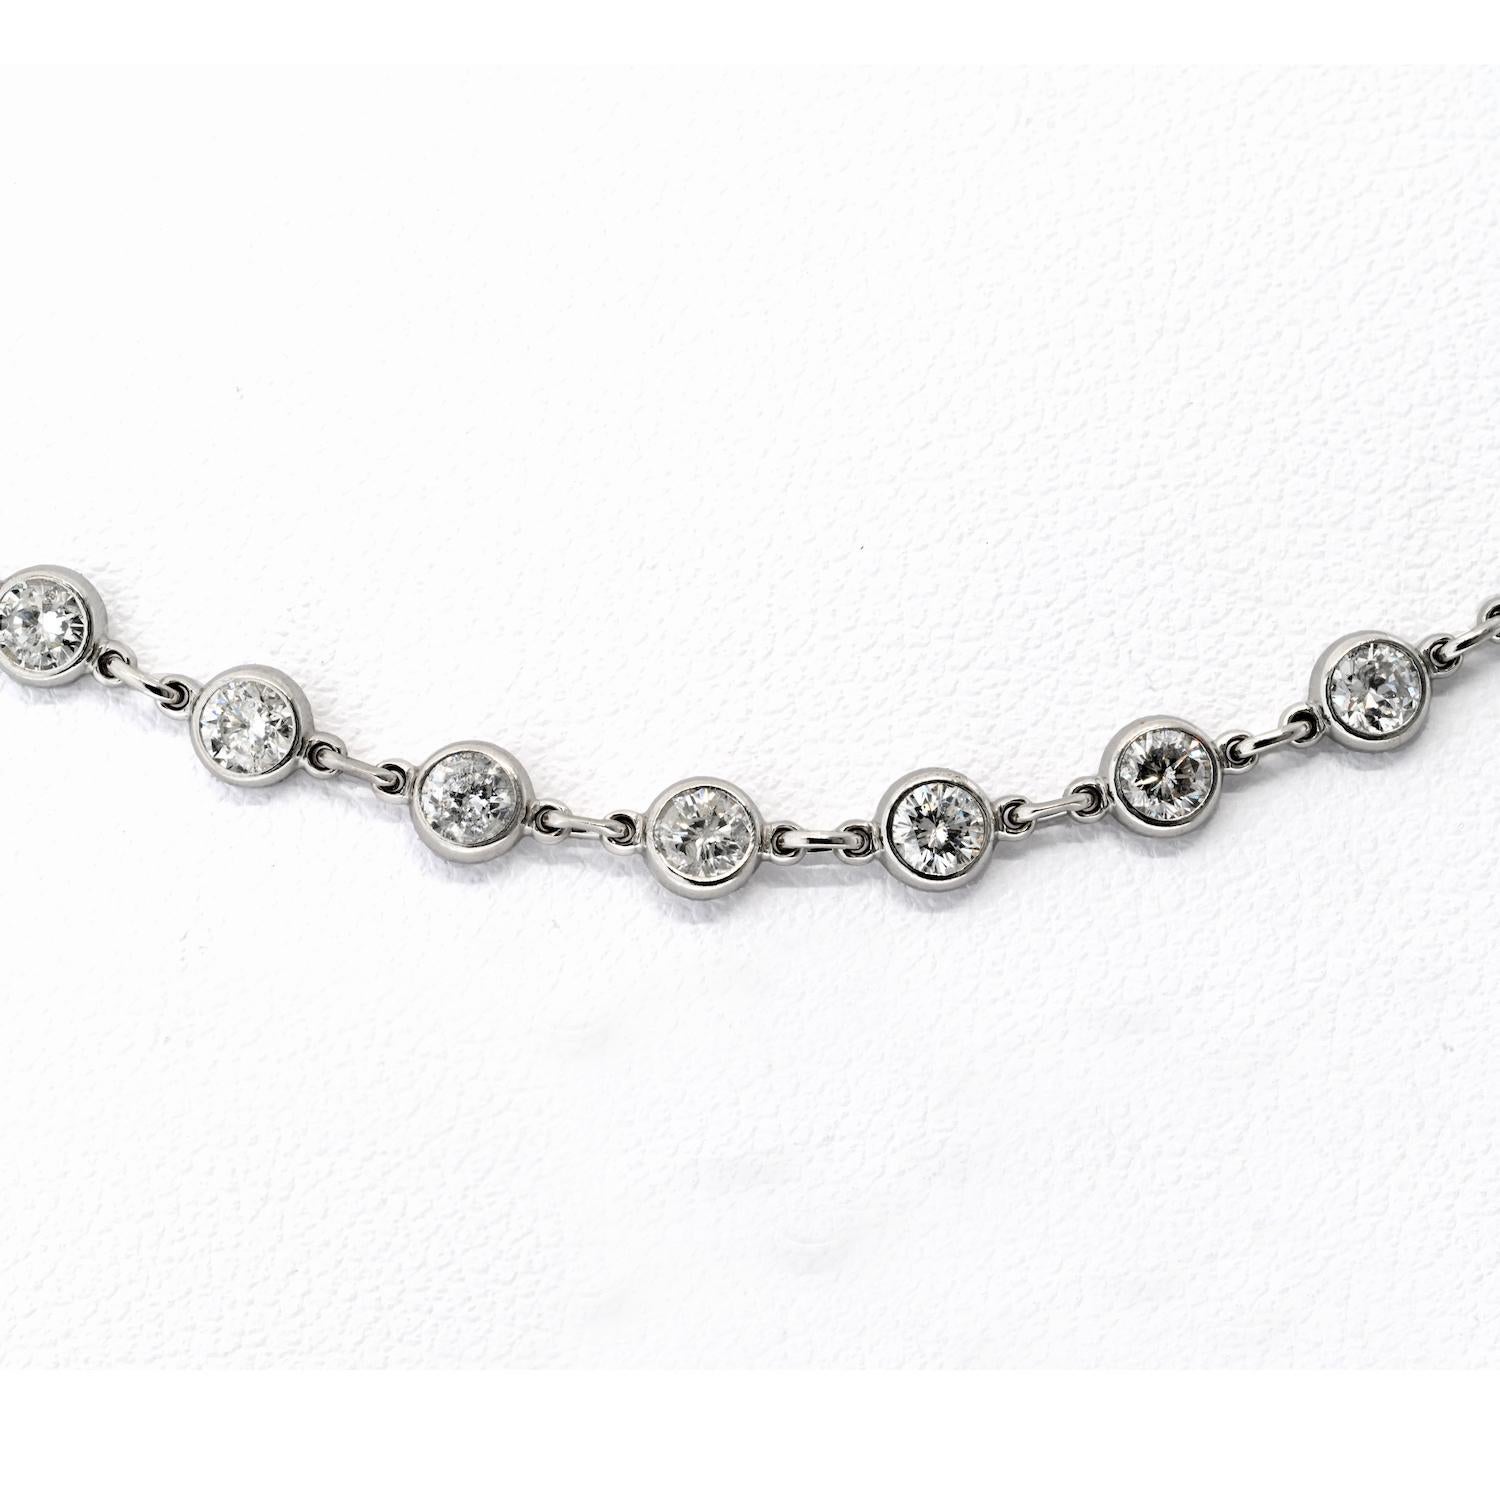 Round Cut 18K White Gold 6.17cttw Diamond By The Yard 16 Inch Chain Necklace For Sale